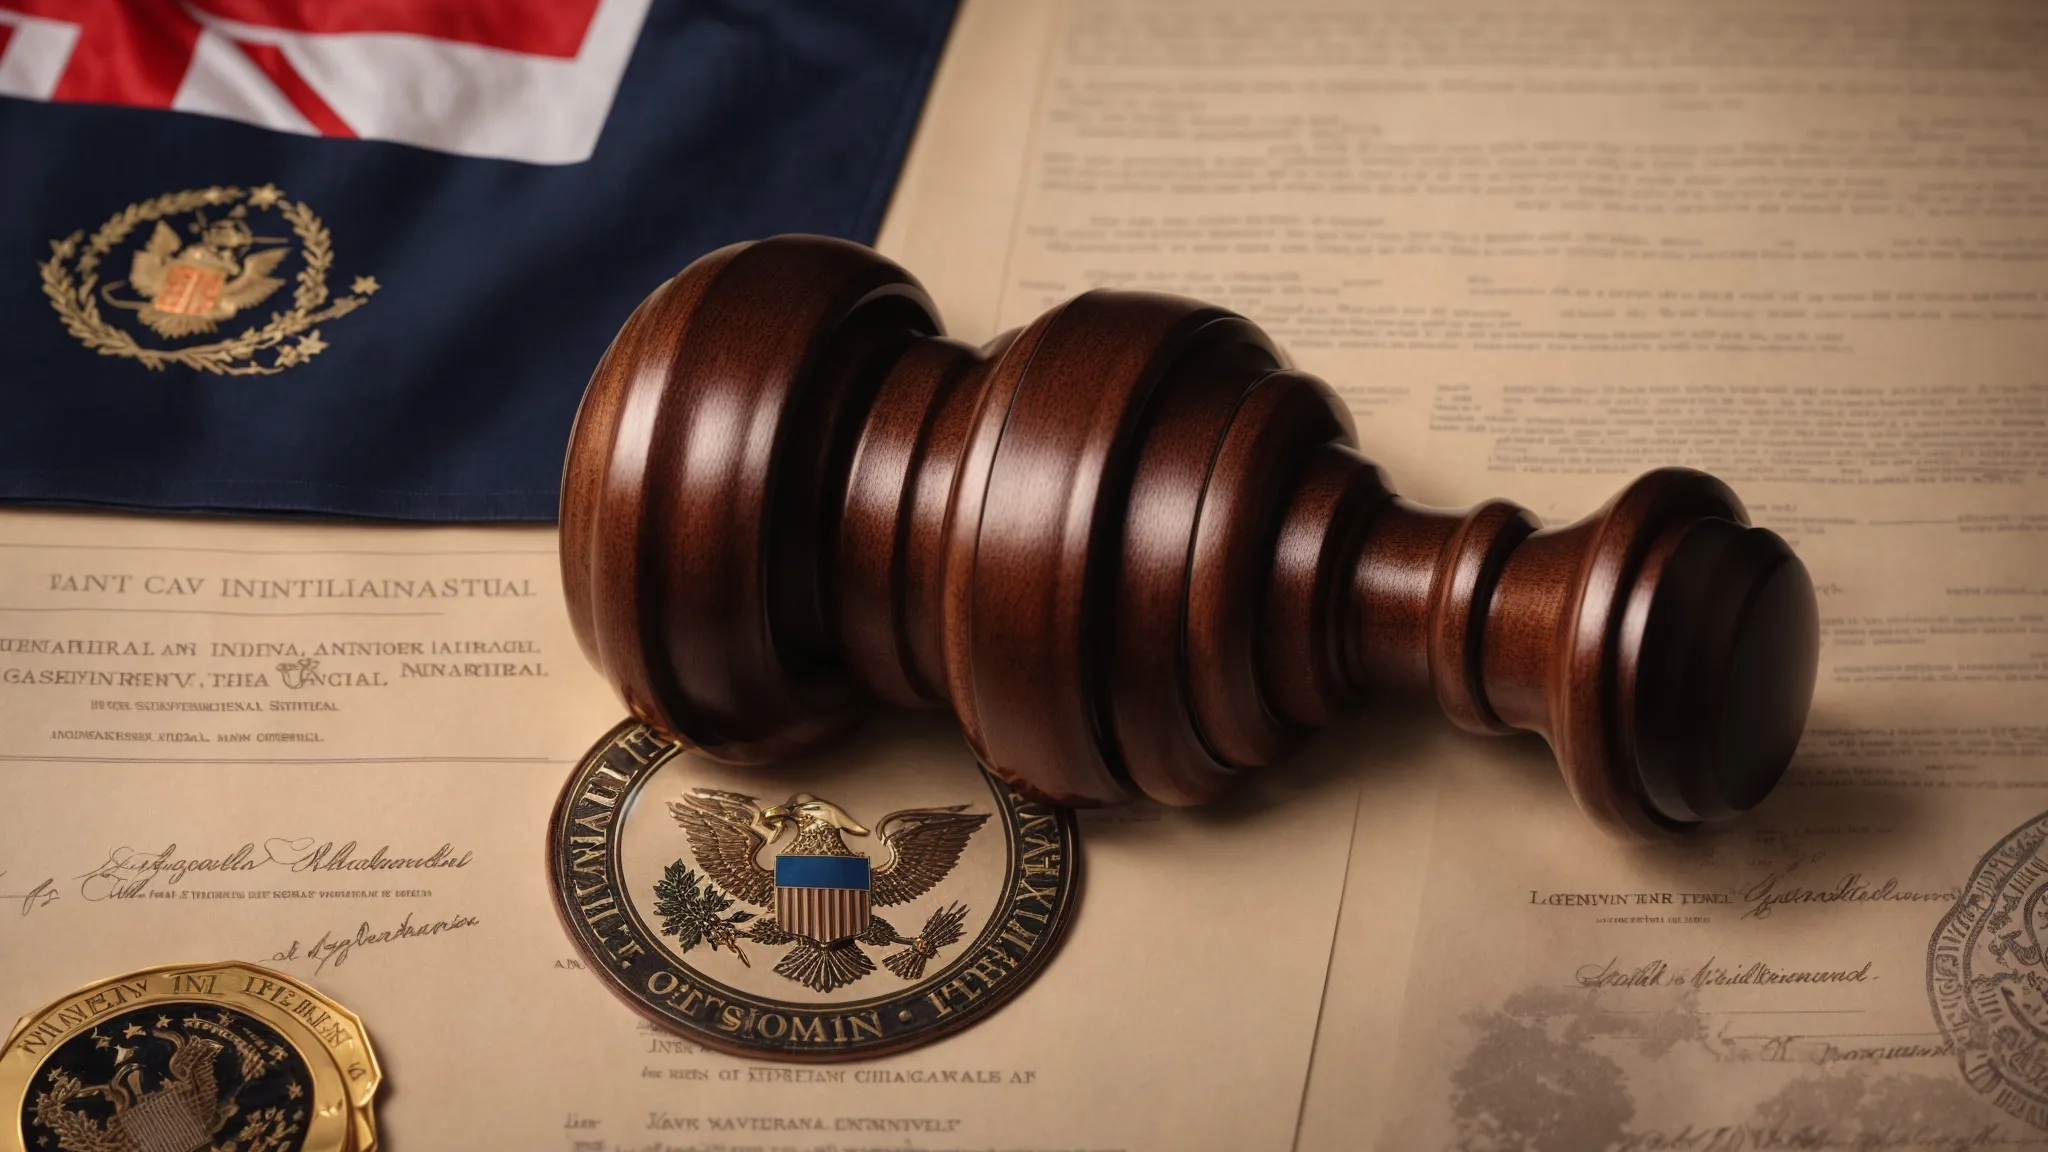 a gavel lies atop a legal document surrounded by official seals and international flags, symbolizing a court's authority in arbitration.